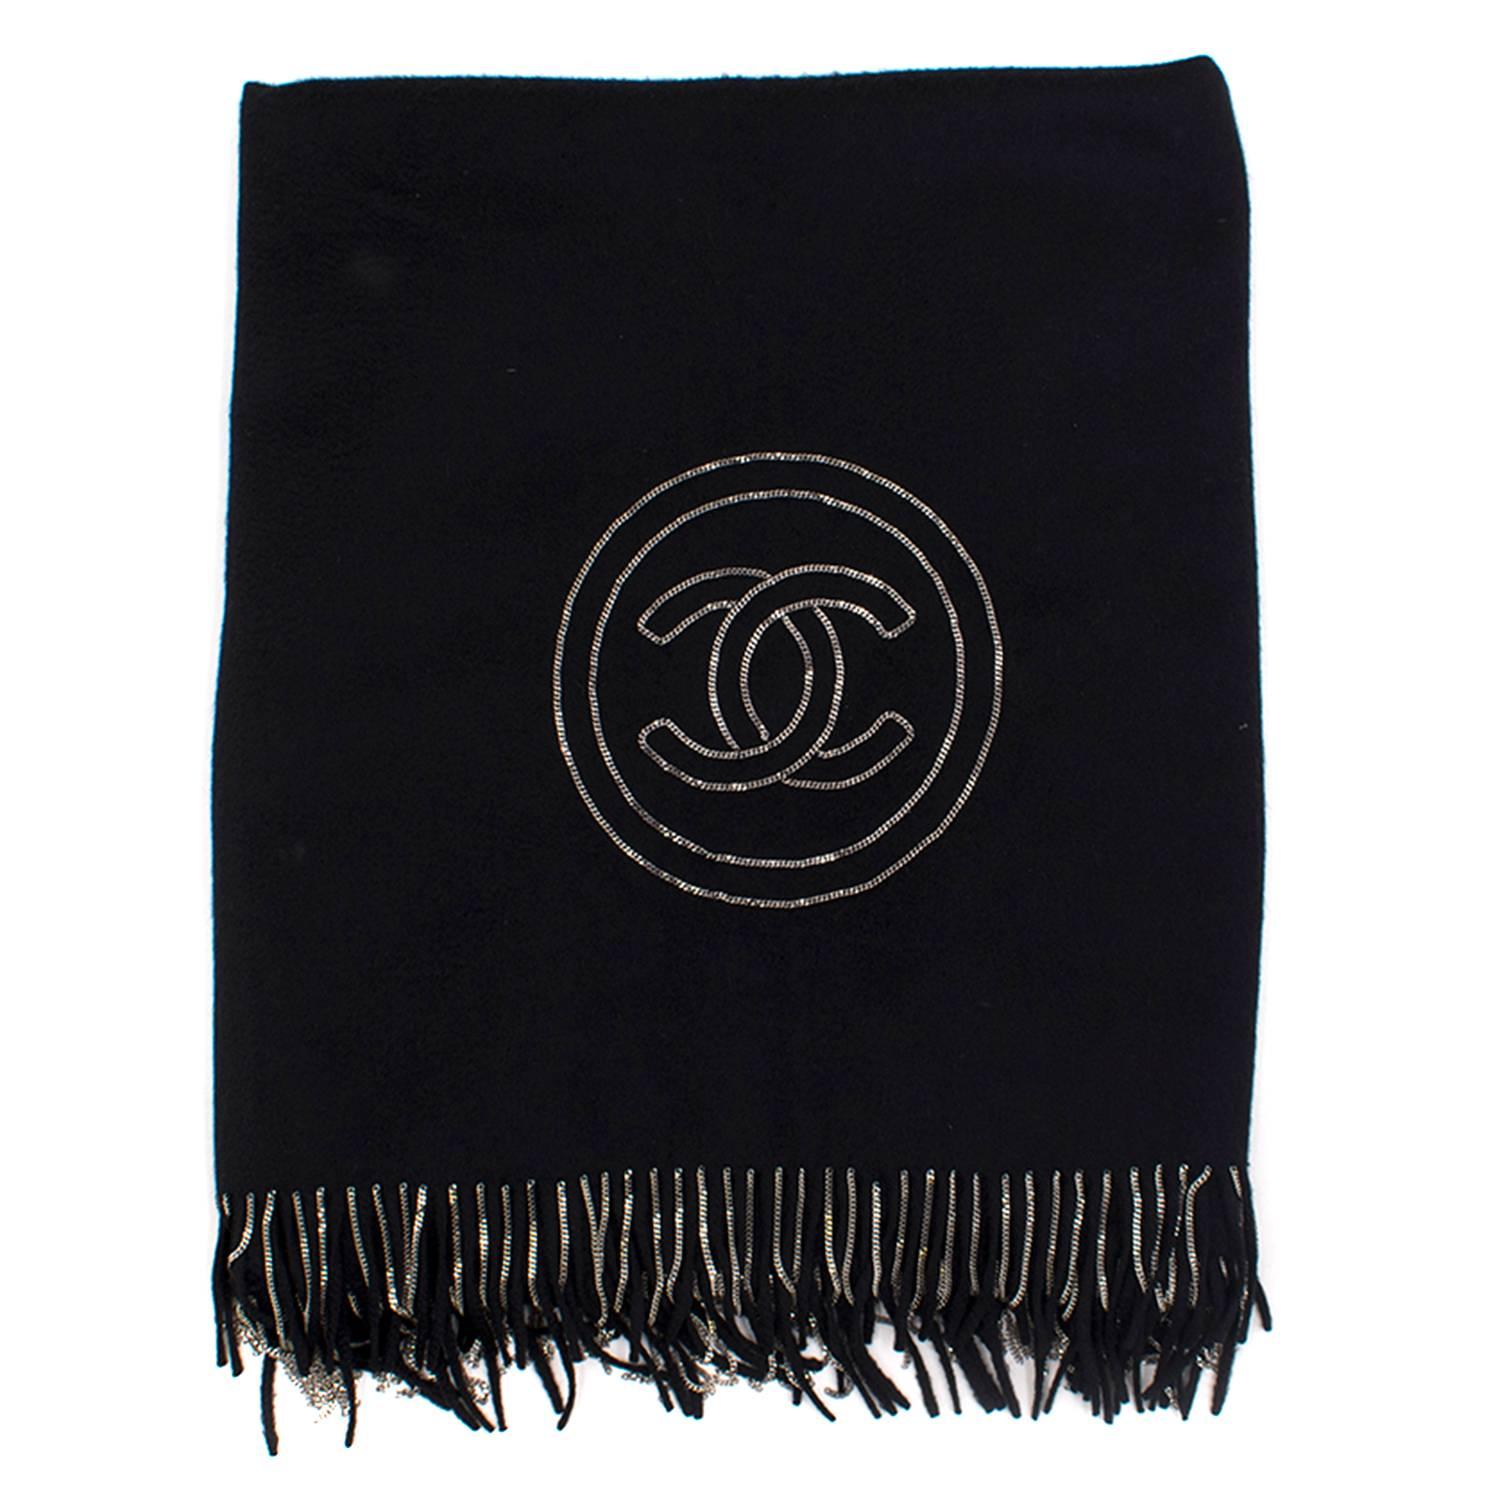 Chanel Black Thick Cashmere Chain Fringe and Embellished CC Wrap.

Made in Italy. 

100% Cashmere. 

Features signature Chanel logo embroidered on front of scarf and chain tasseled hem. 

Perfect condition: 10/10. Never worn without tags. 

Please